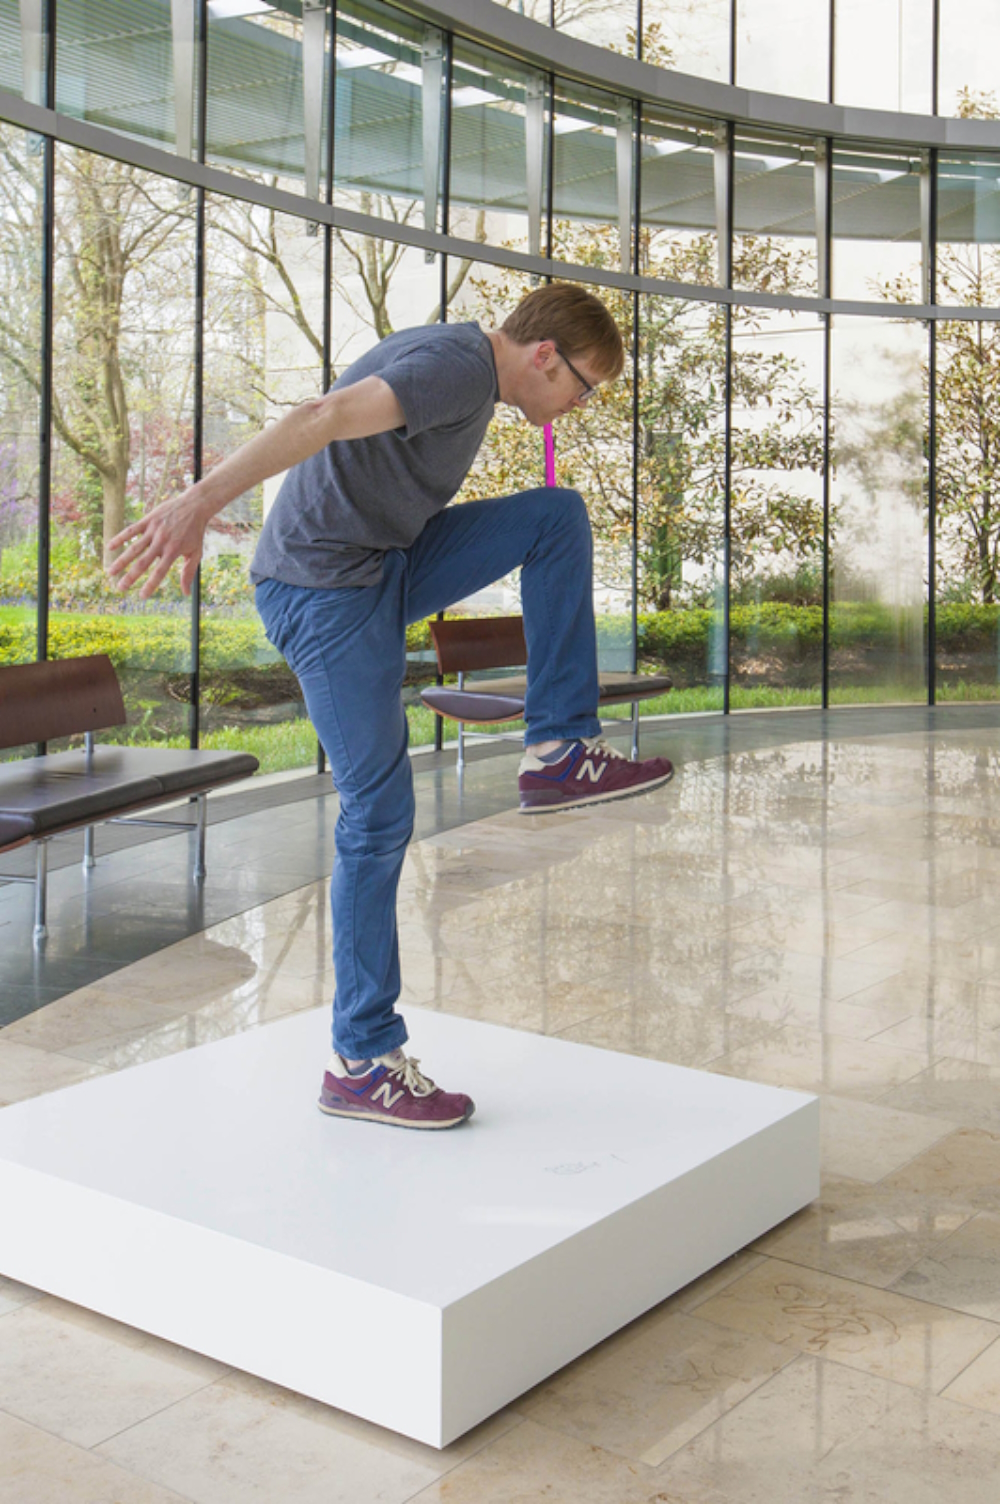 'The speculative Realist' ('Euclidean Exercises') from the 'One Minute Sculptures' series, performed by the public in 2015.